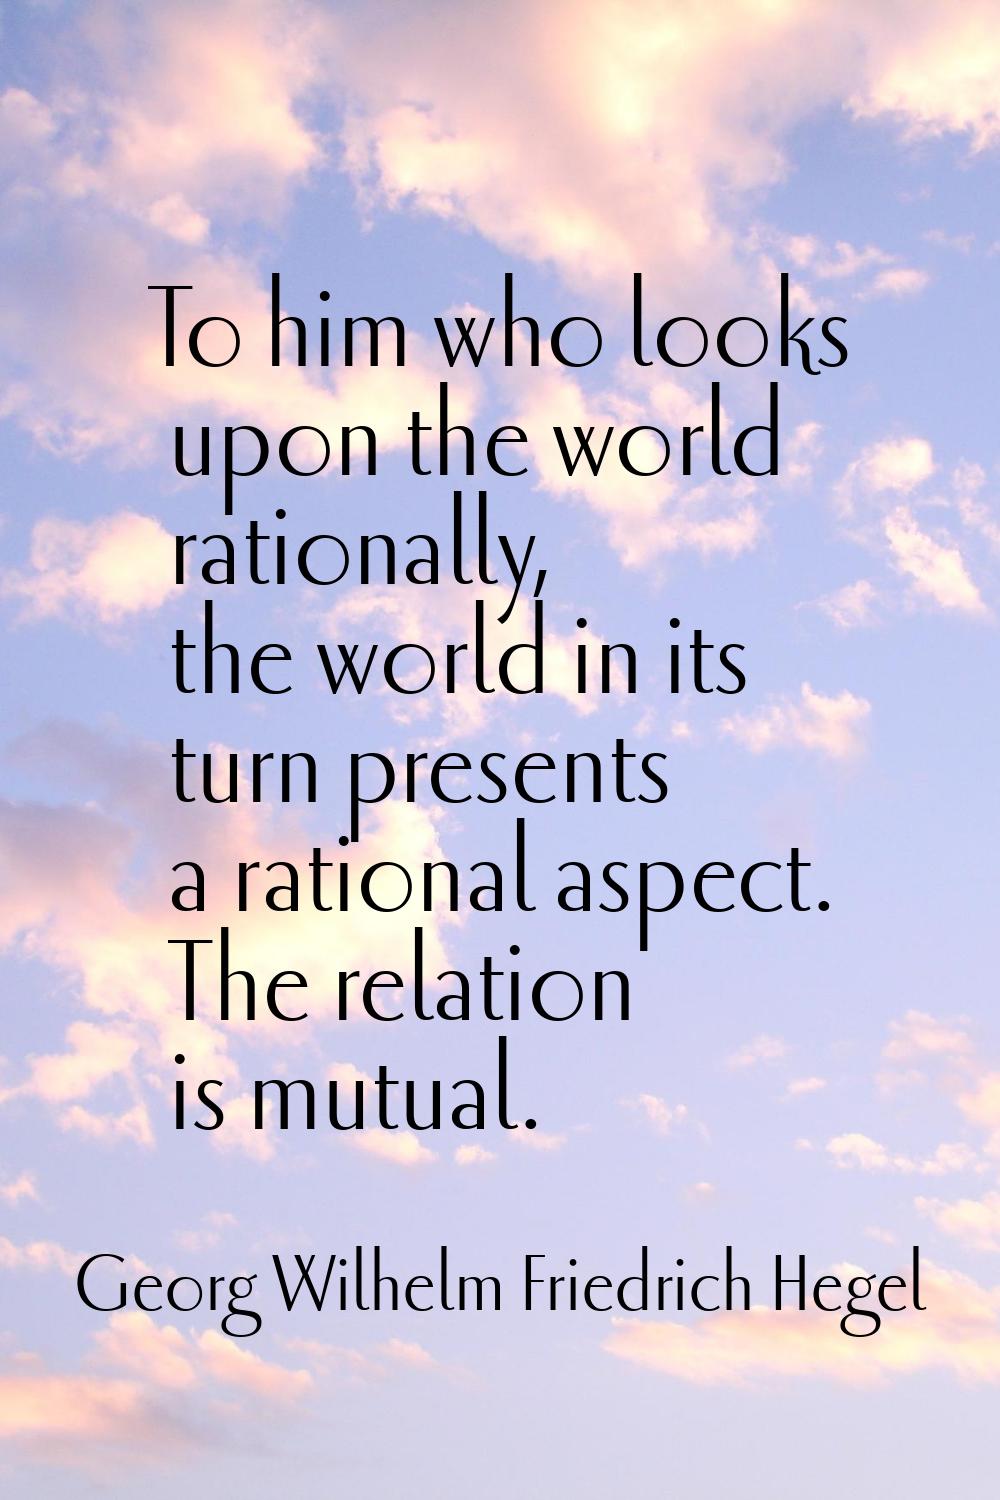 To him who looks upon the world rationally, the world in its turn presents a rational aspect. The r